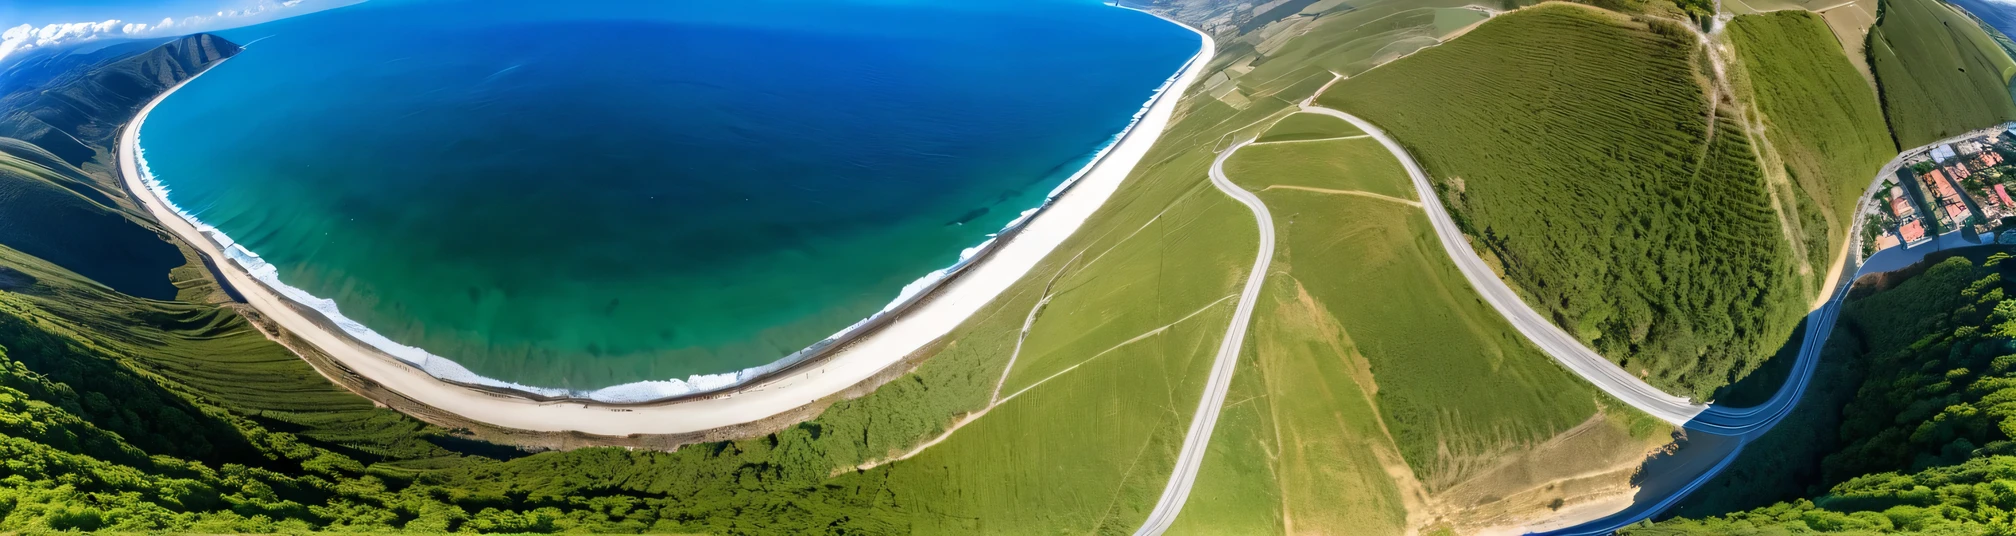 View from a height of 50 meters, shot with an action camera, shot from a paraglider, ((Blue Coast)), widescreen photo, space curvature effect, panoramatization, panorama curvature